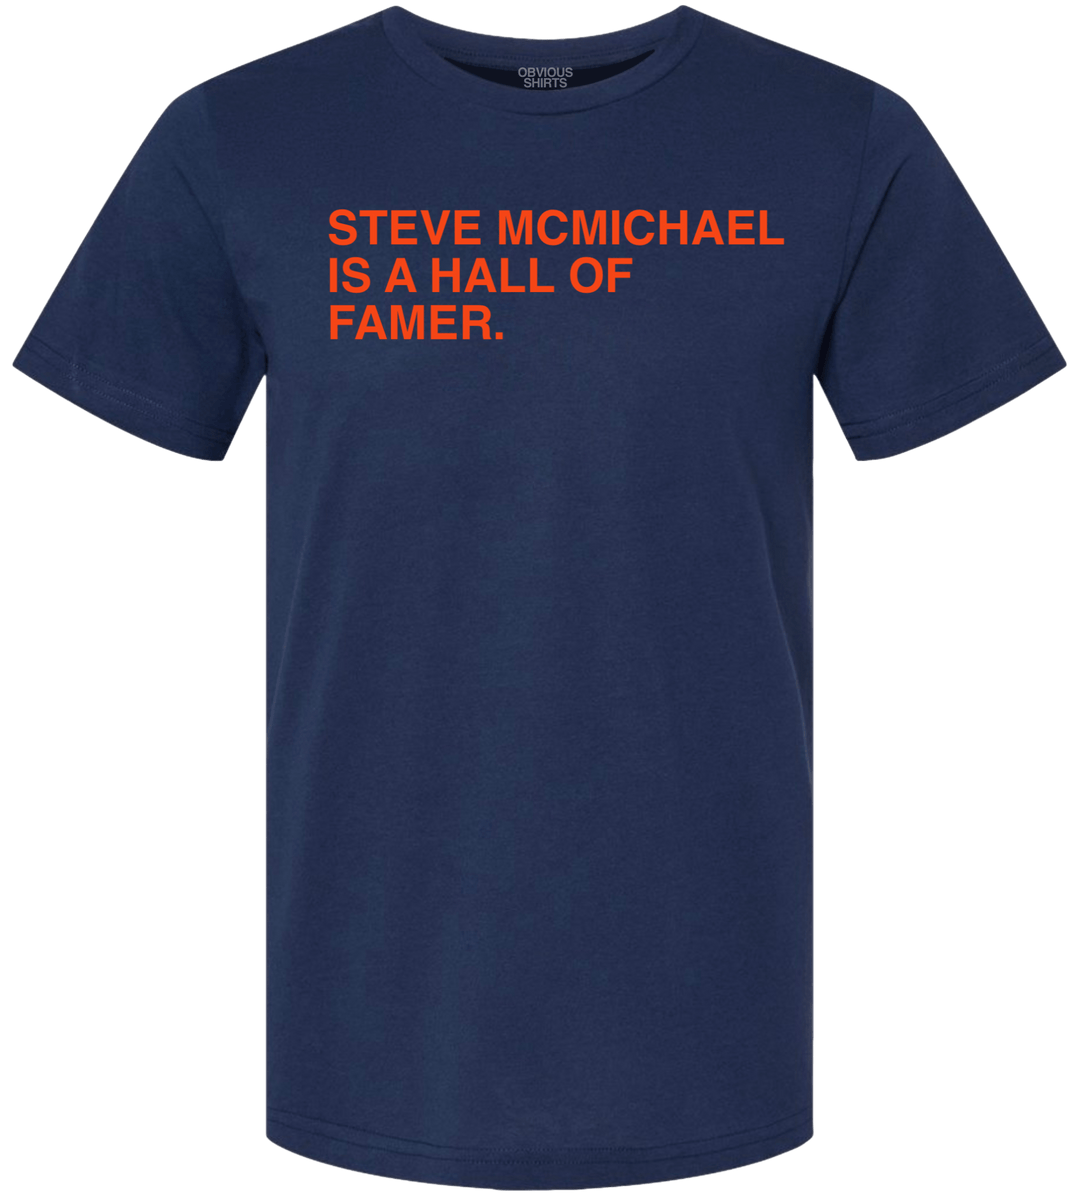 STEVE MCMICHAEL IS A HALL OF FAMER. - OBVIOUS SHIRTS